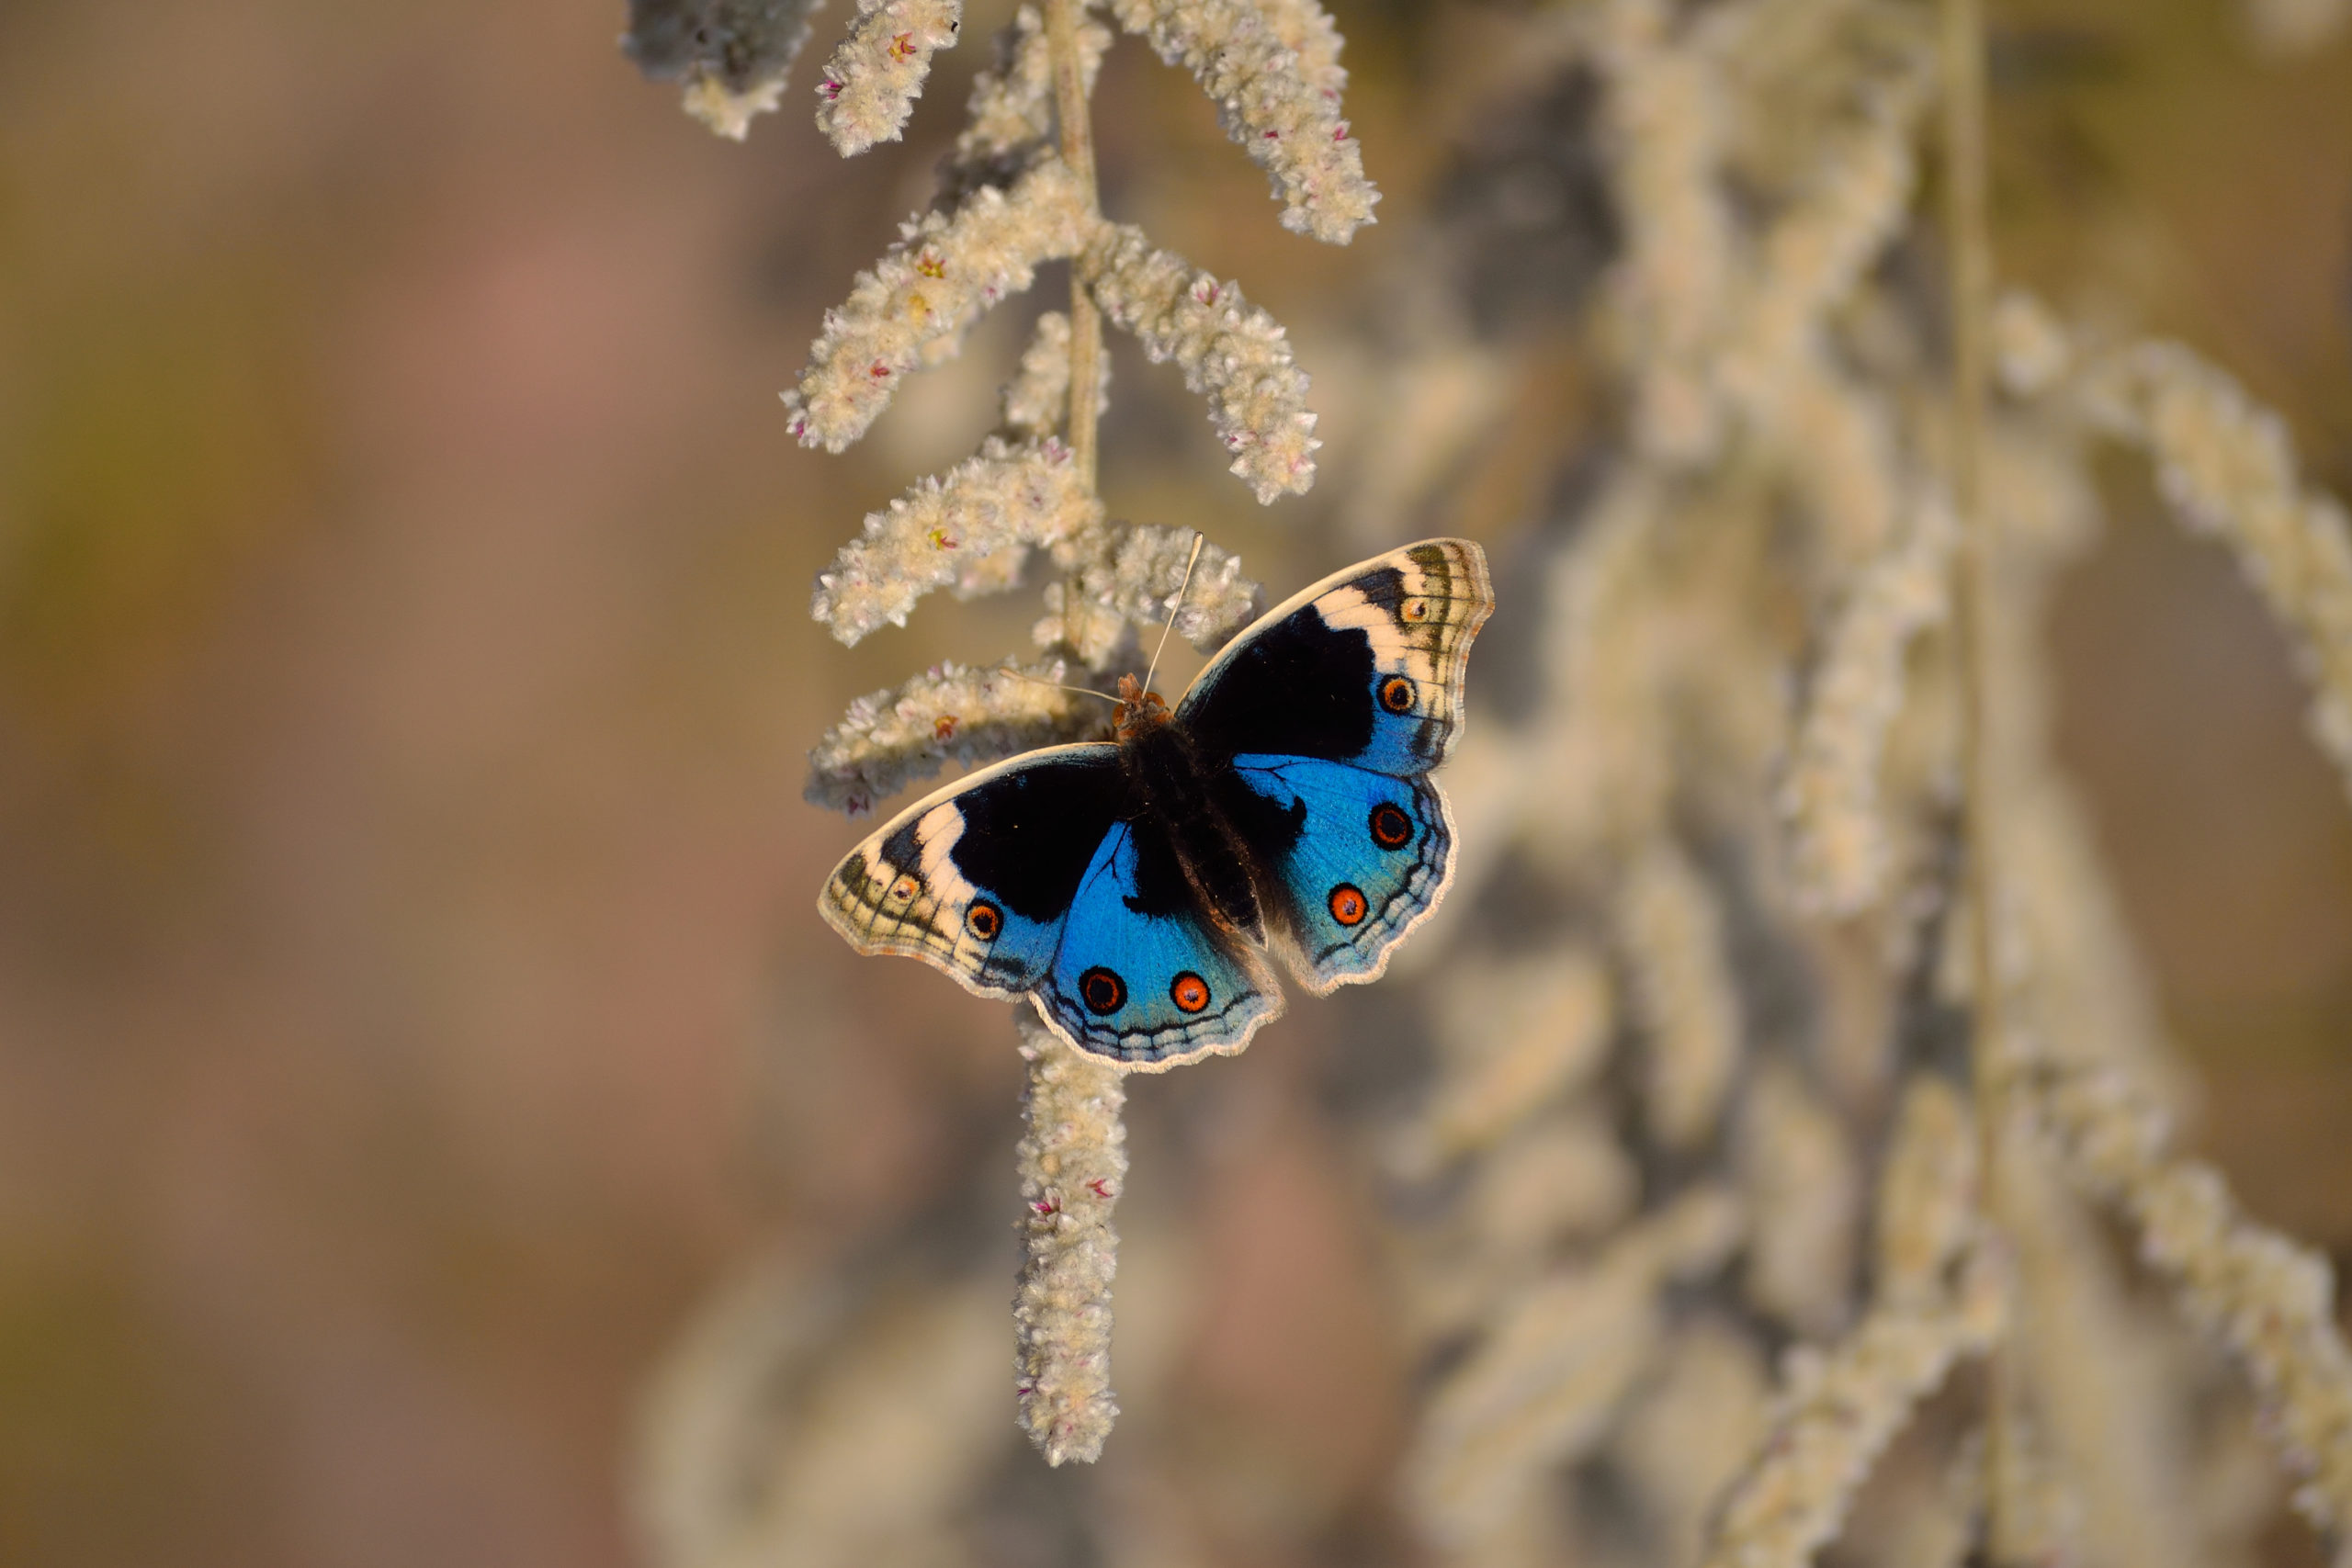 A Complete guide for Butterfly Photography